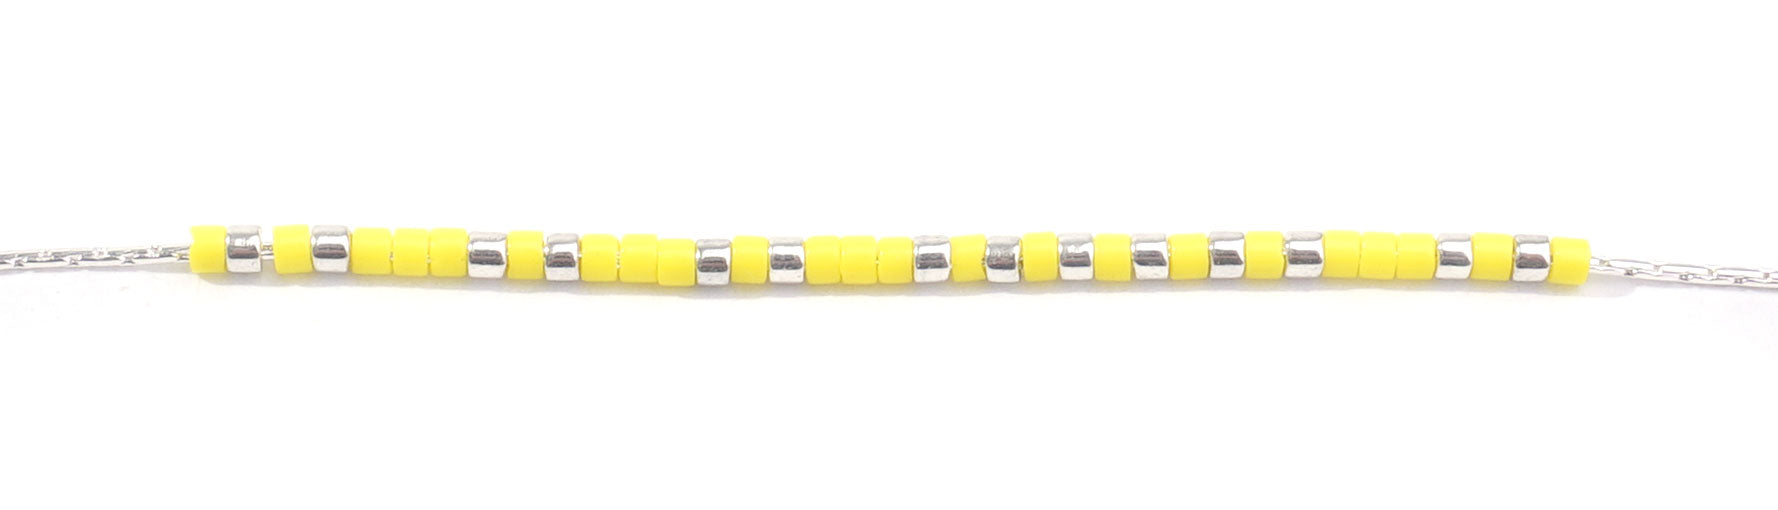 DIY Dainty Morse Code Necklace with Delica Seed Beads - "FIERCE" in Silver and Yellow - Goody Beads